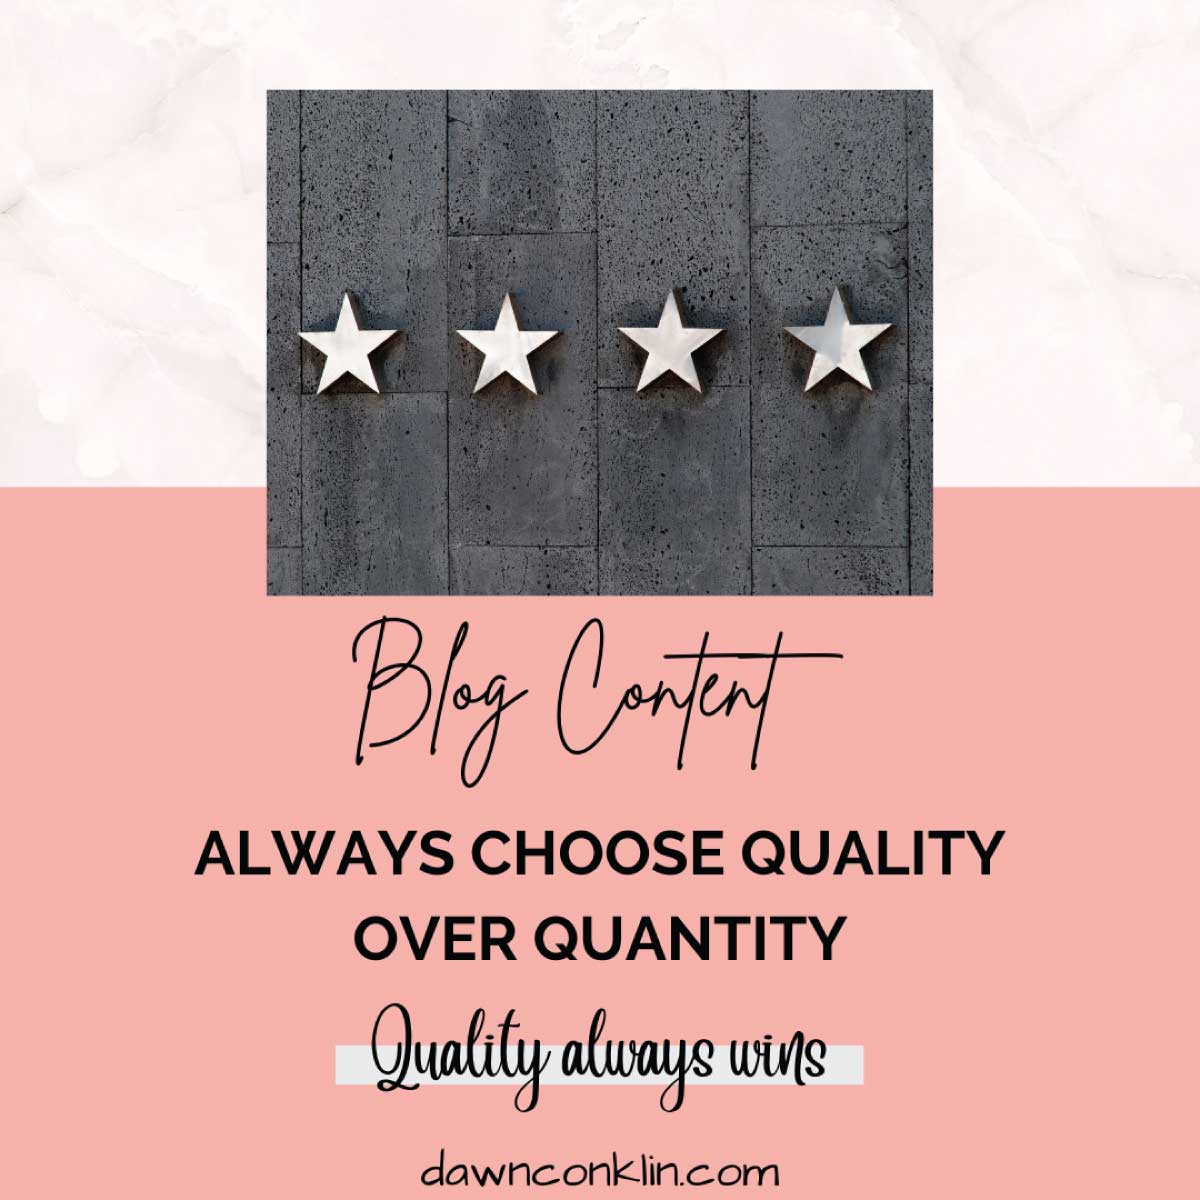 Blog content - Always choose quality over quantity. Quality always wins.